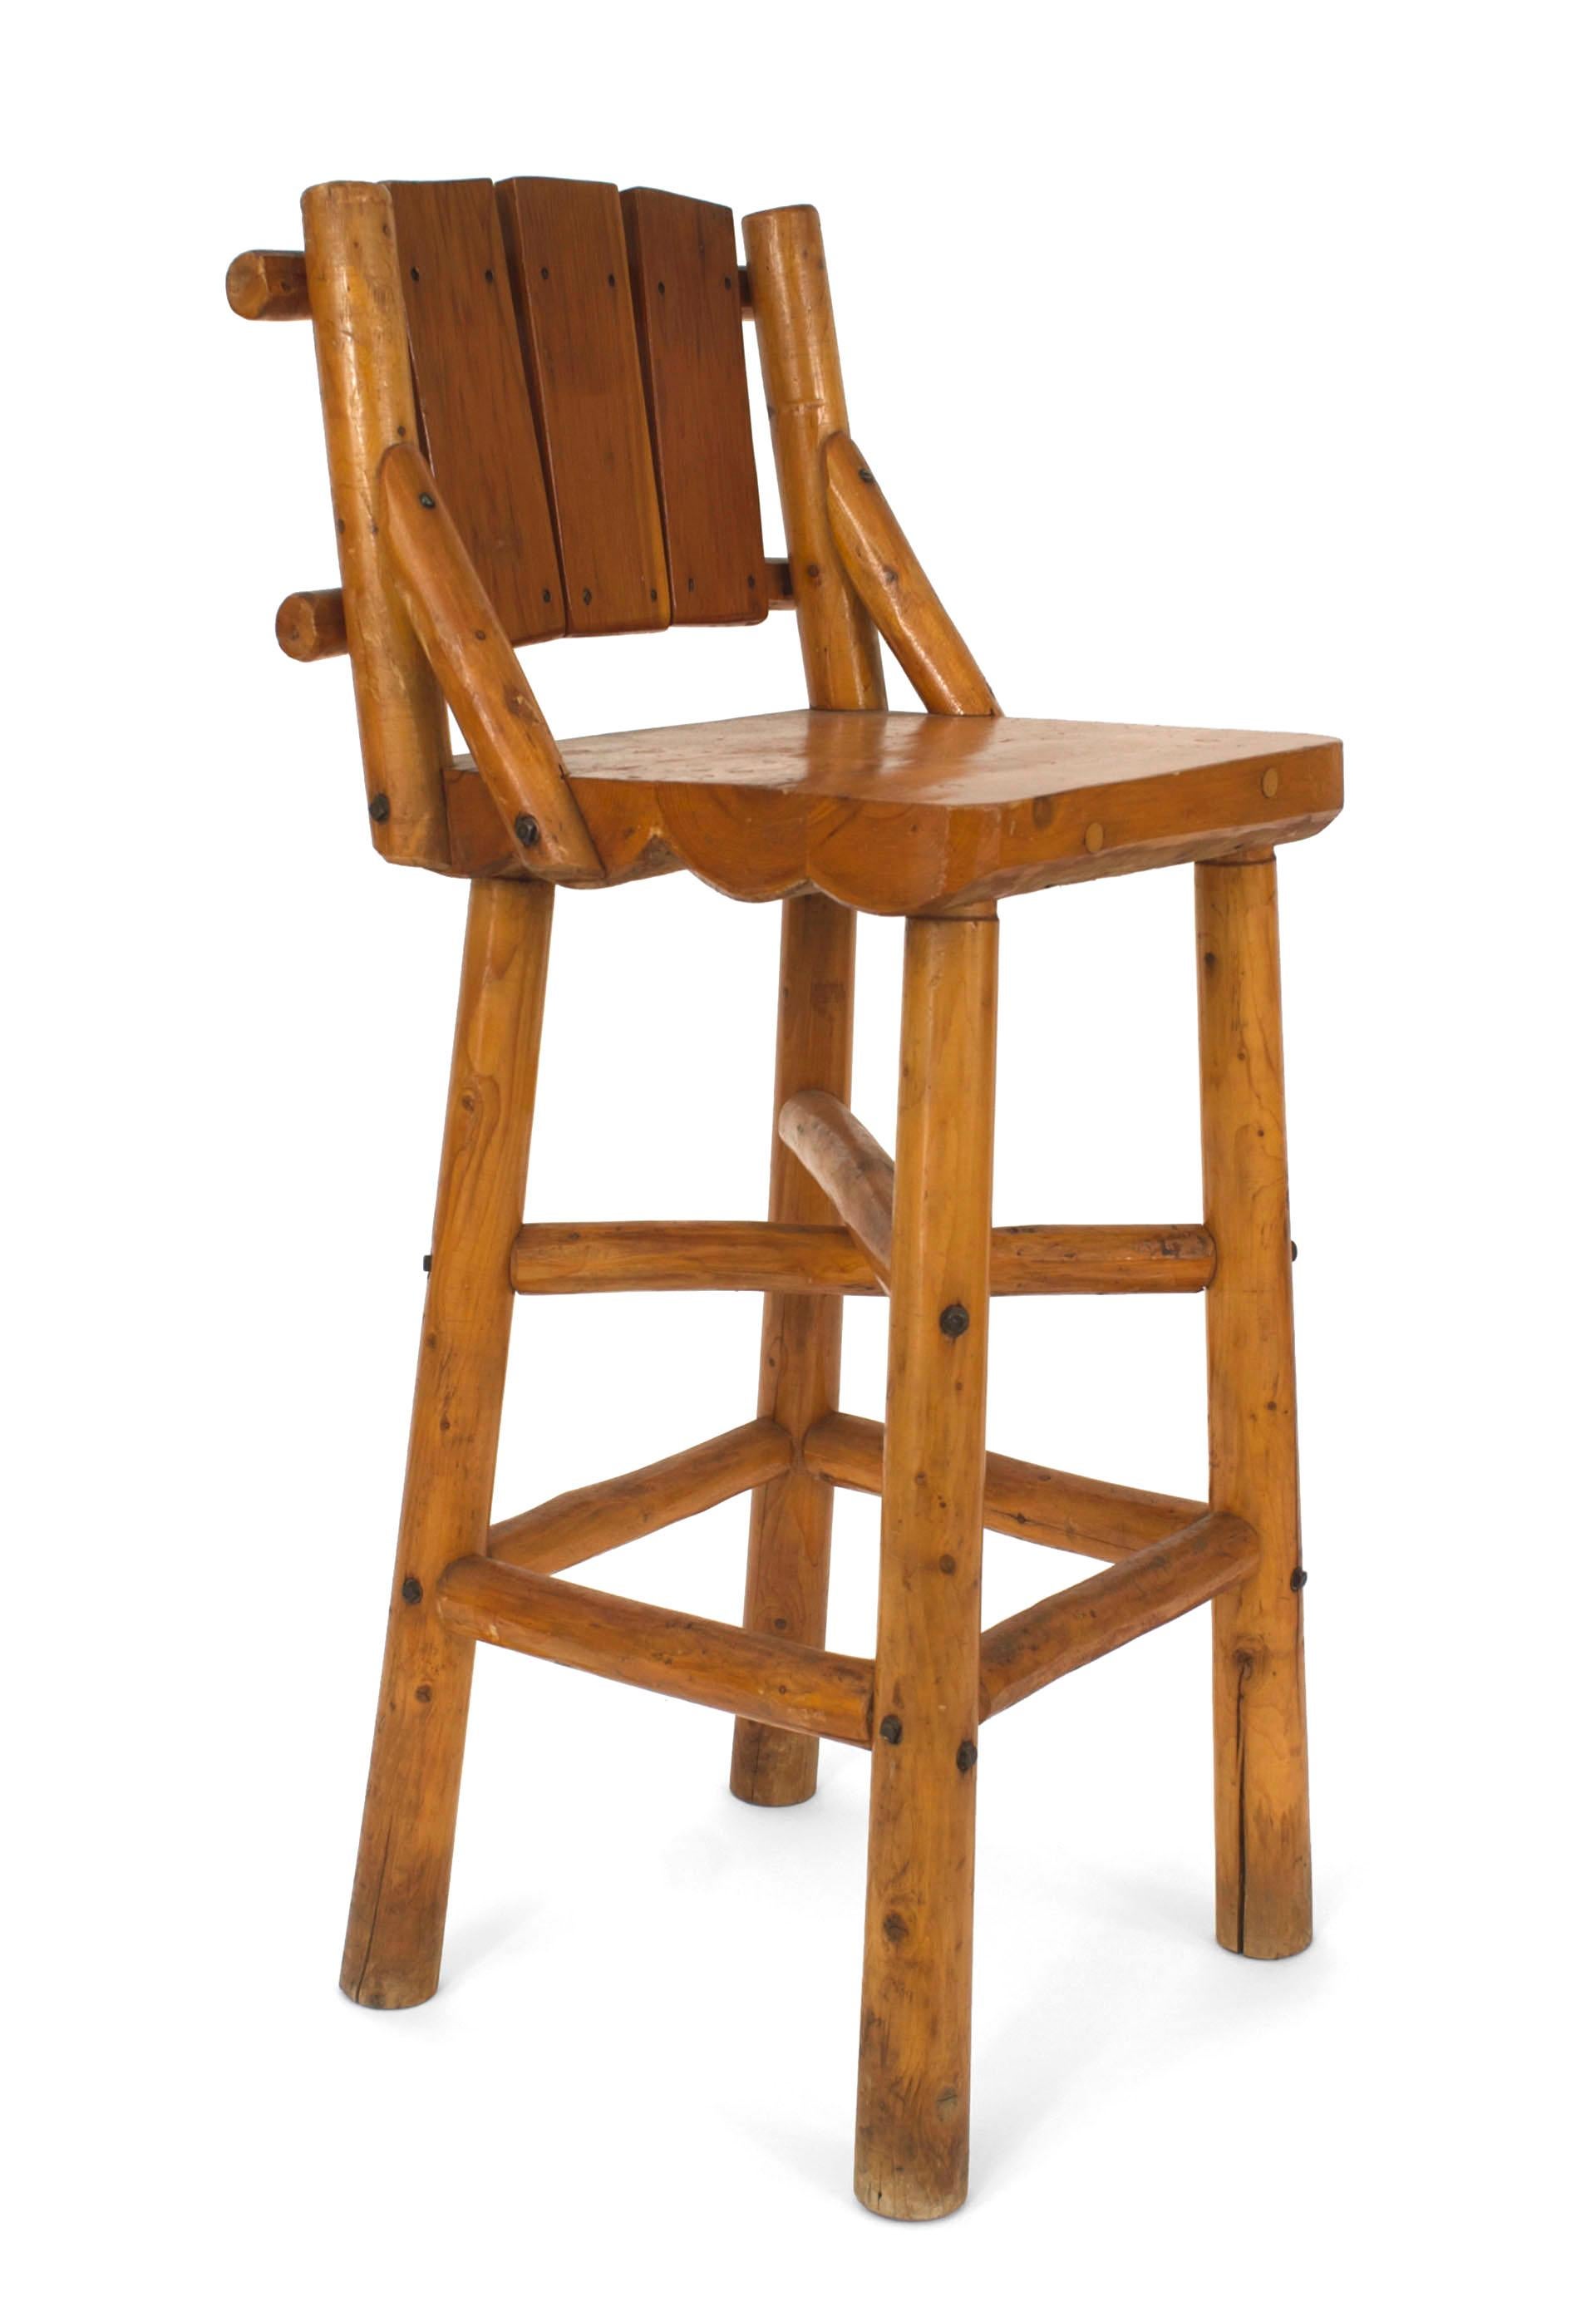 Set of 4 American Old Hickory-style (1950s) cedar bar stools with a low slat back and an 